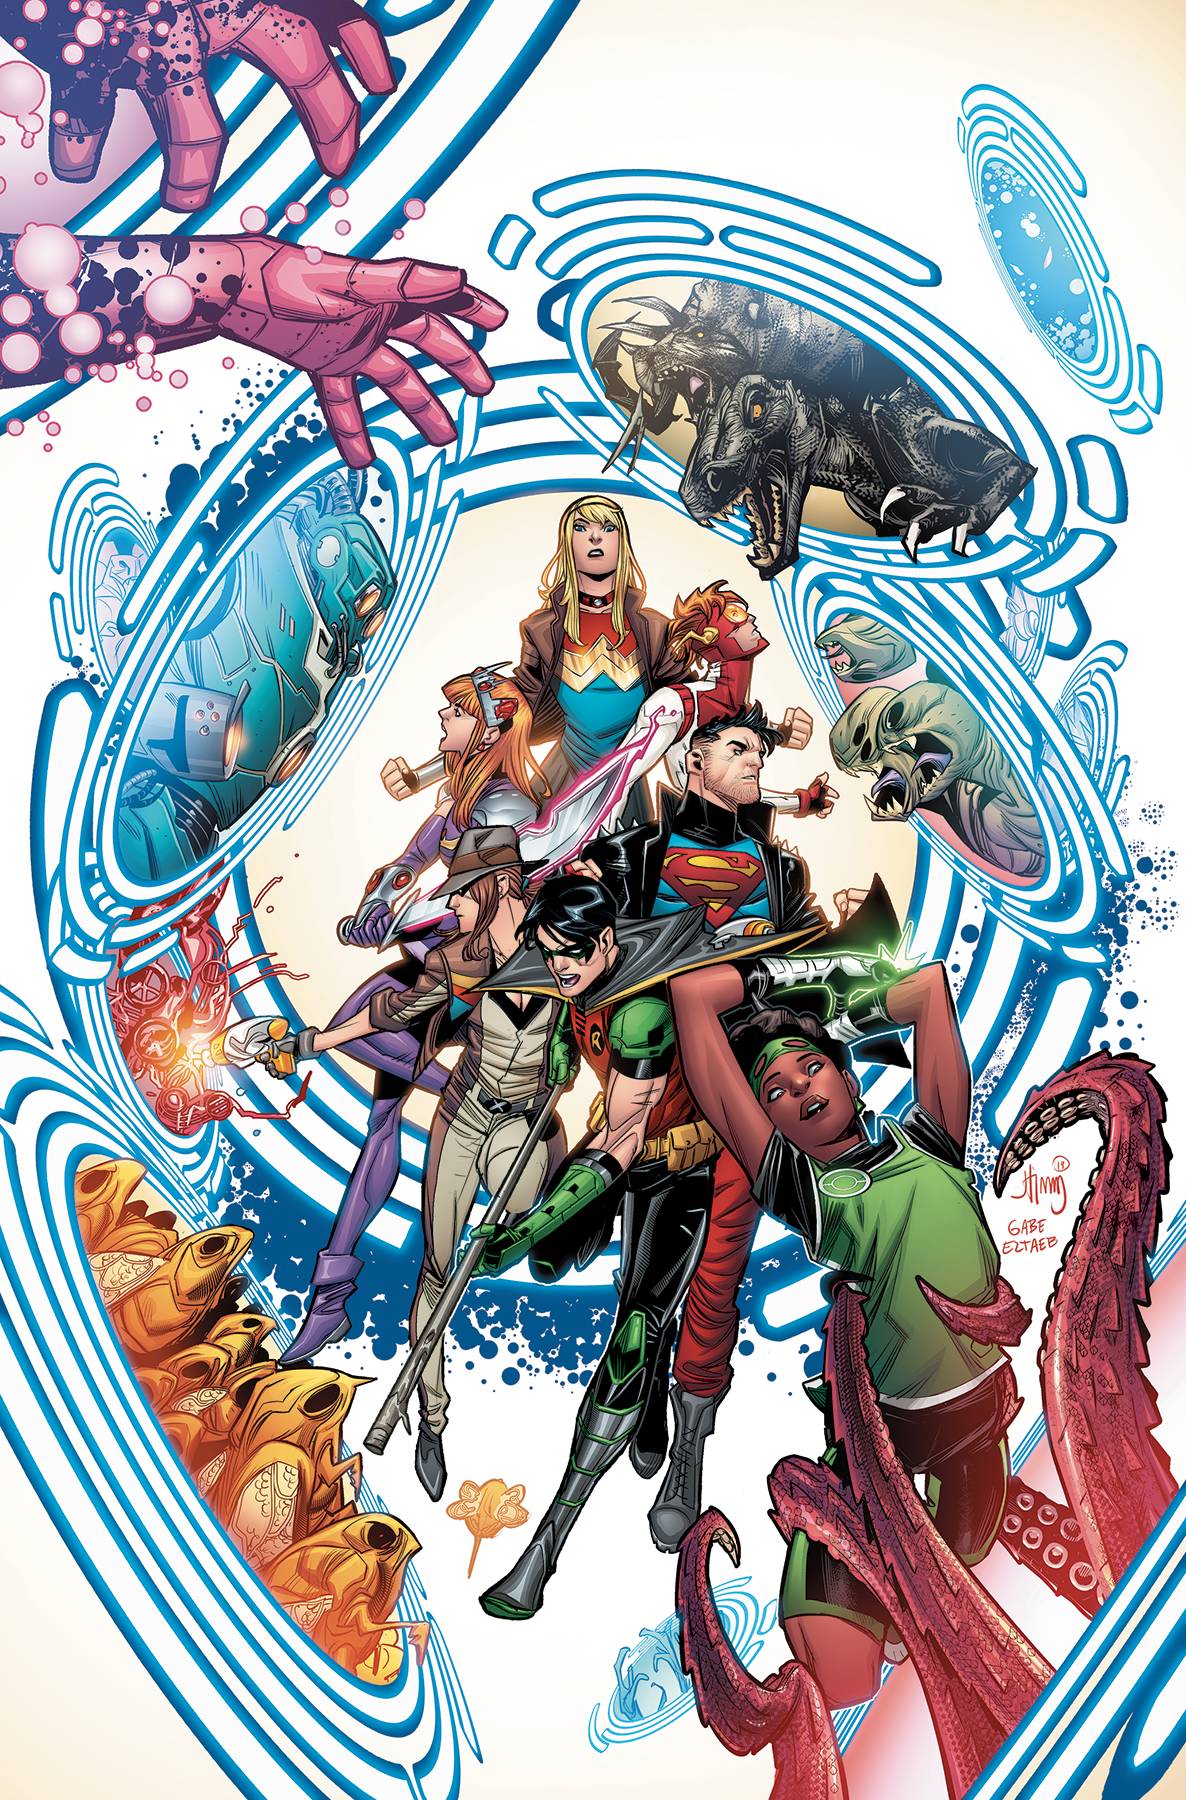 07/03/2019 YOUNG JUSTICE #7